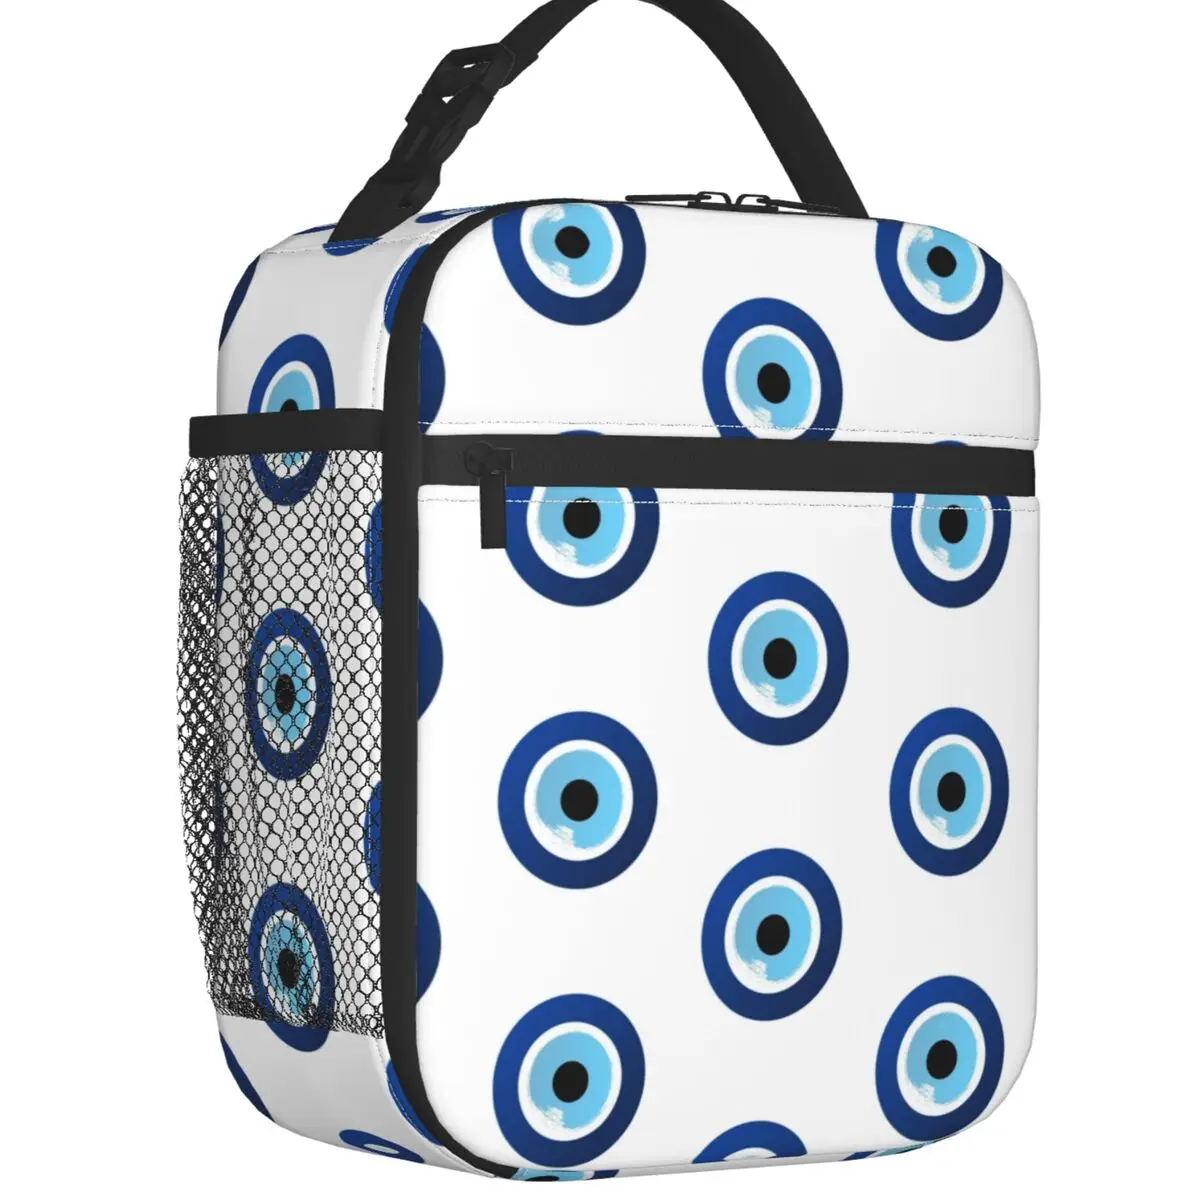 Greek Evil Eye Hamsa Resuable Lunch Boxes Leakproof Nazar Amulet Boho Charm Cooler Thermal Food Insulated Lunch Bag Office Work